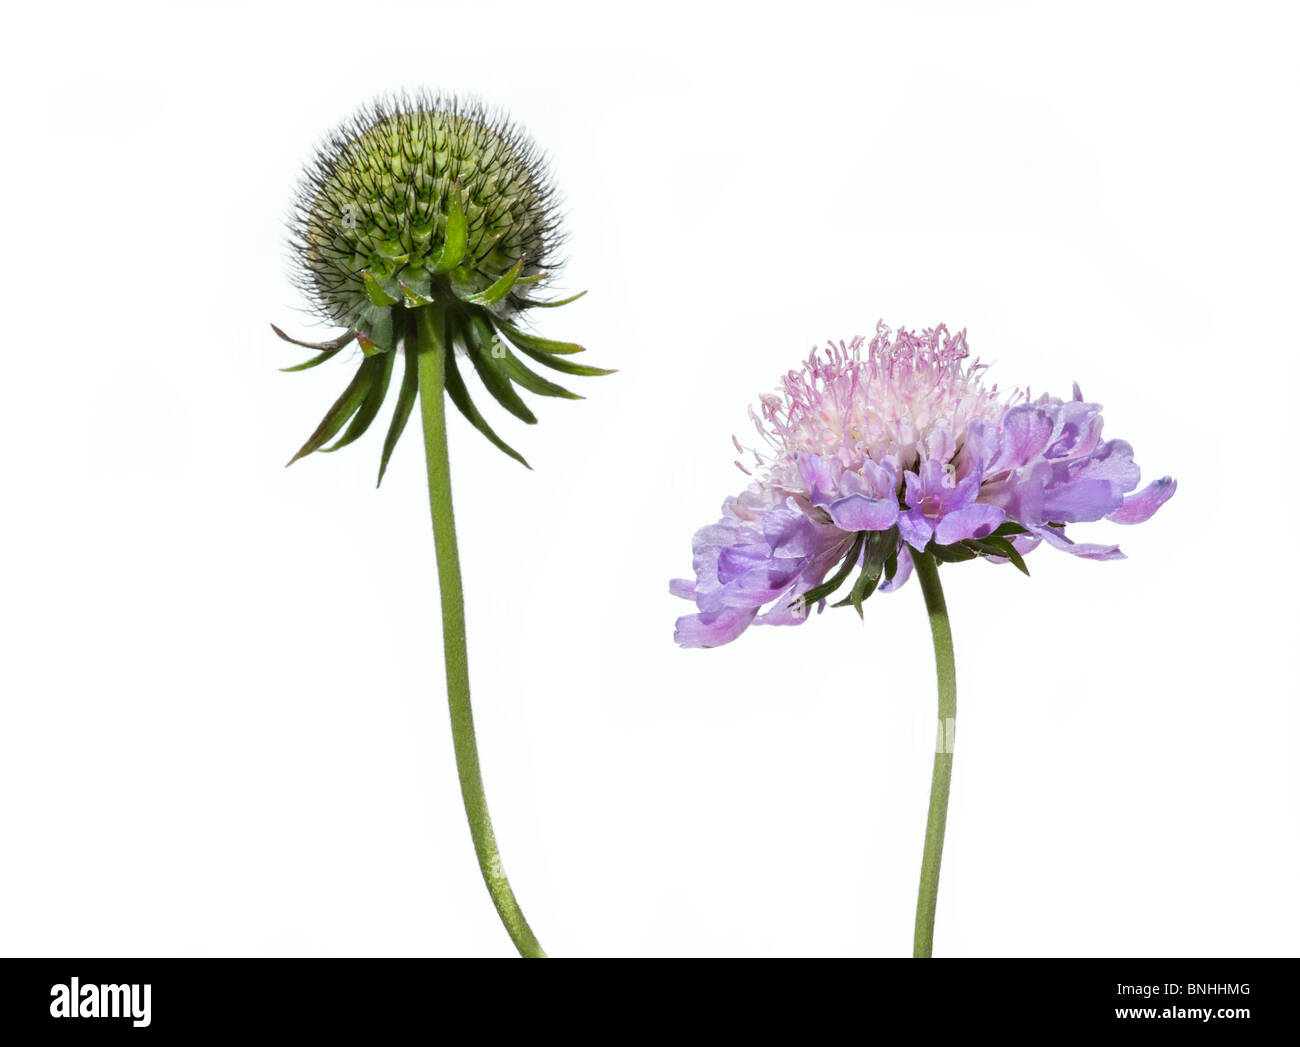 Scabiosa columbaria 'Misty' Papillons against white background Banque D'Images